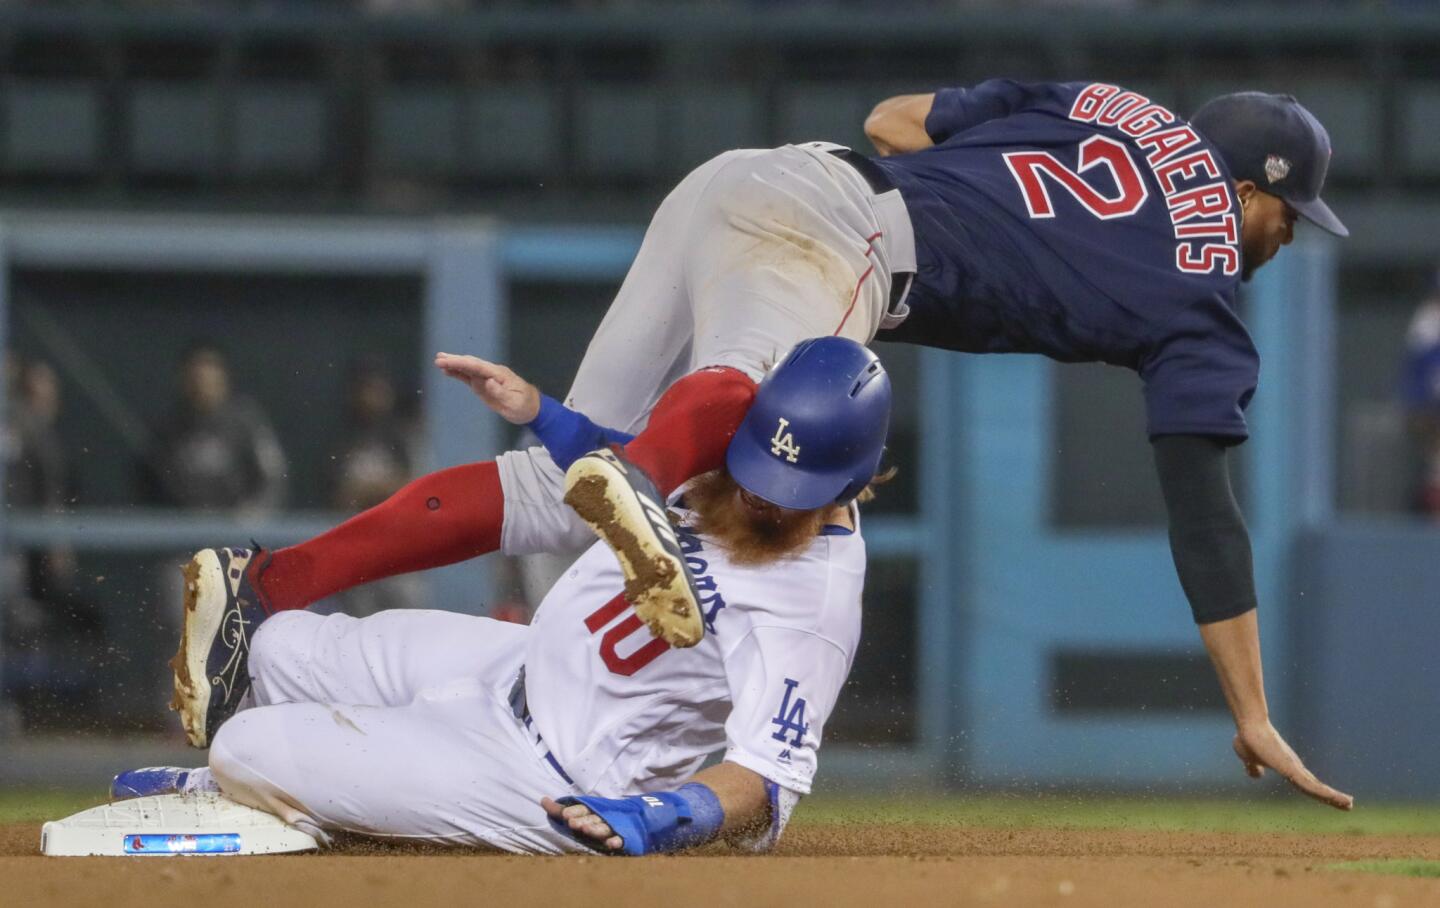 Dodgers Justin Turner is out at second on an eighth inning Max Muncy grounder as Red Sox shortstop Xander Boegaerts tumbles over him.